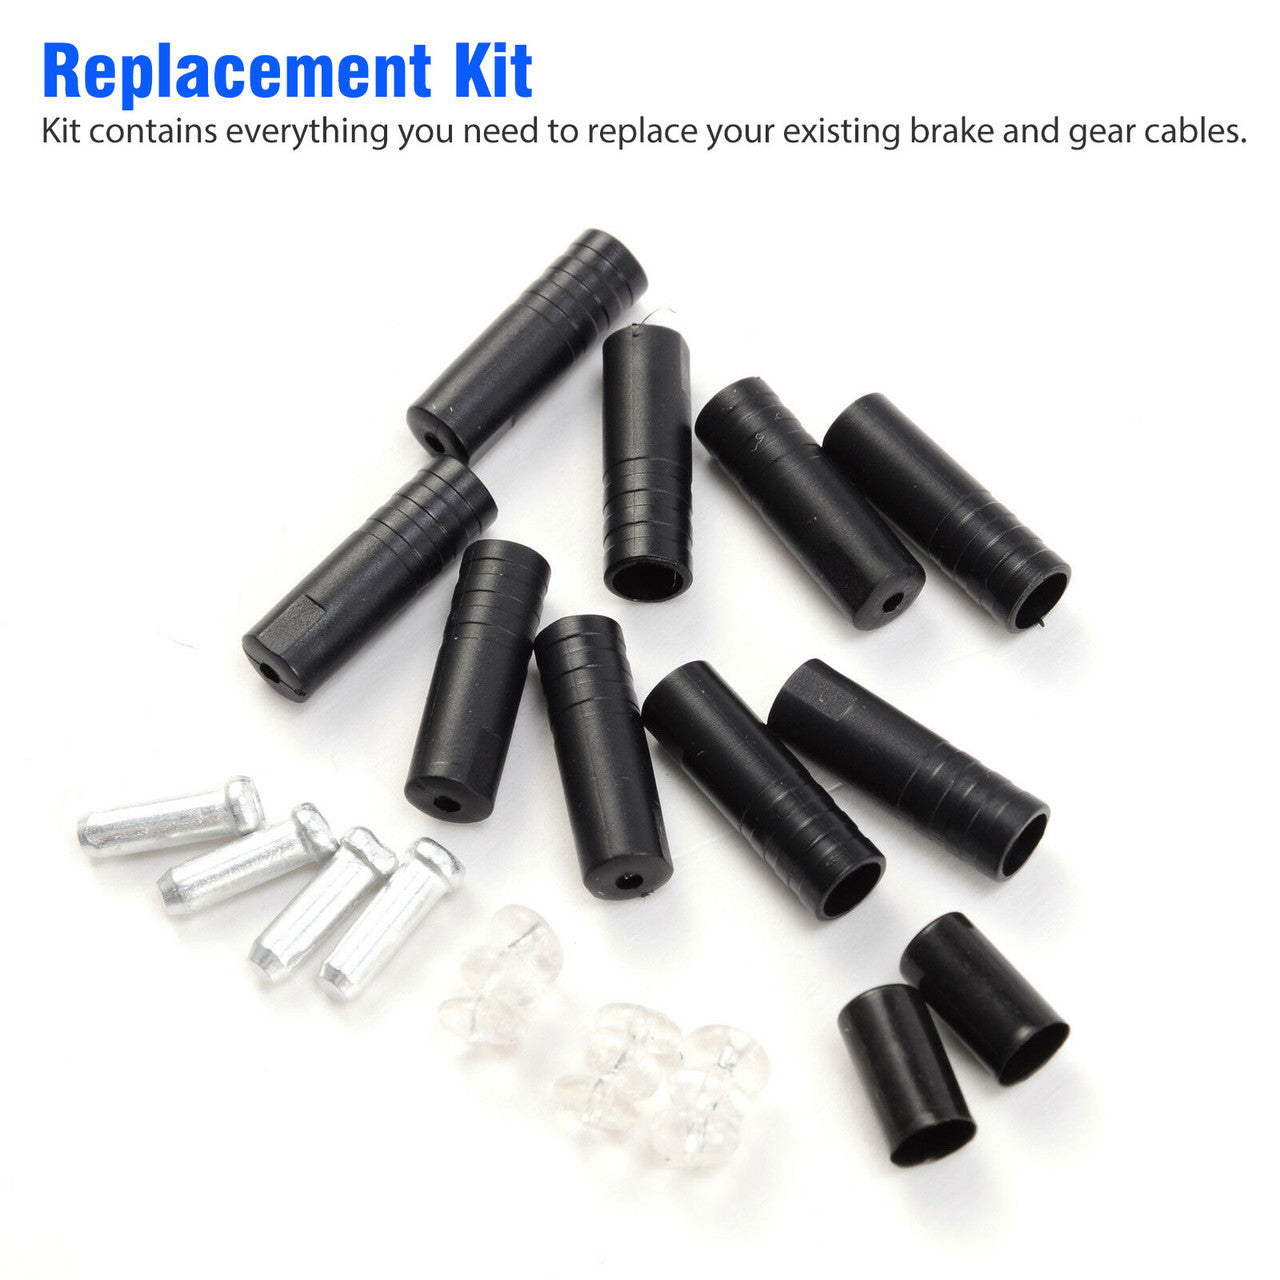 Bicycle Derailleur Cable Brake Wire Replacement Kit for MTB Road Bicycle Repairing, 23Pcs